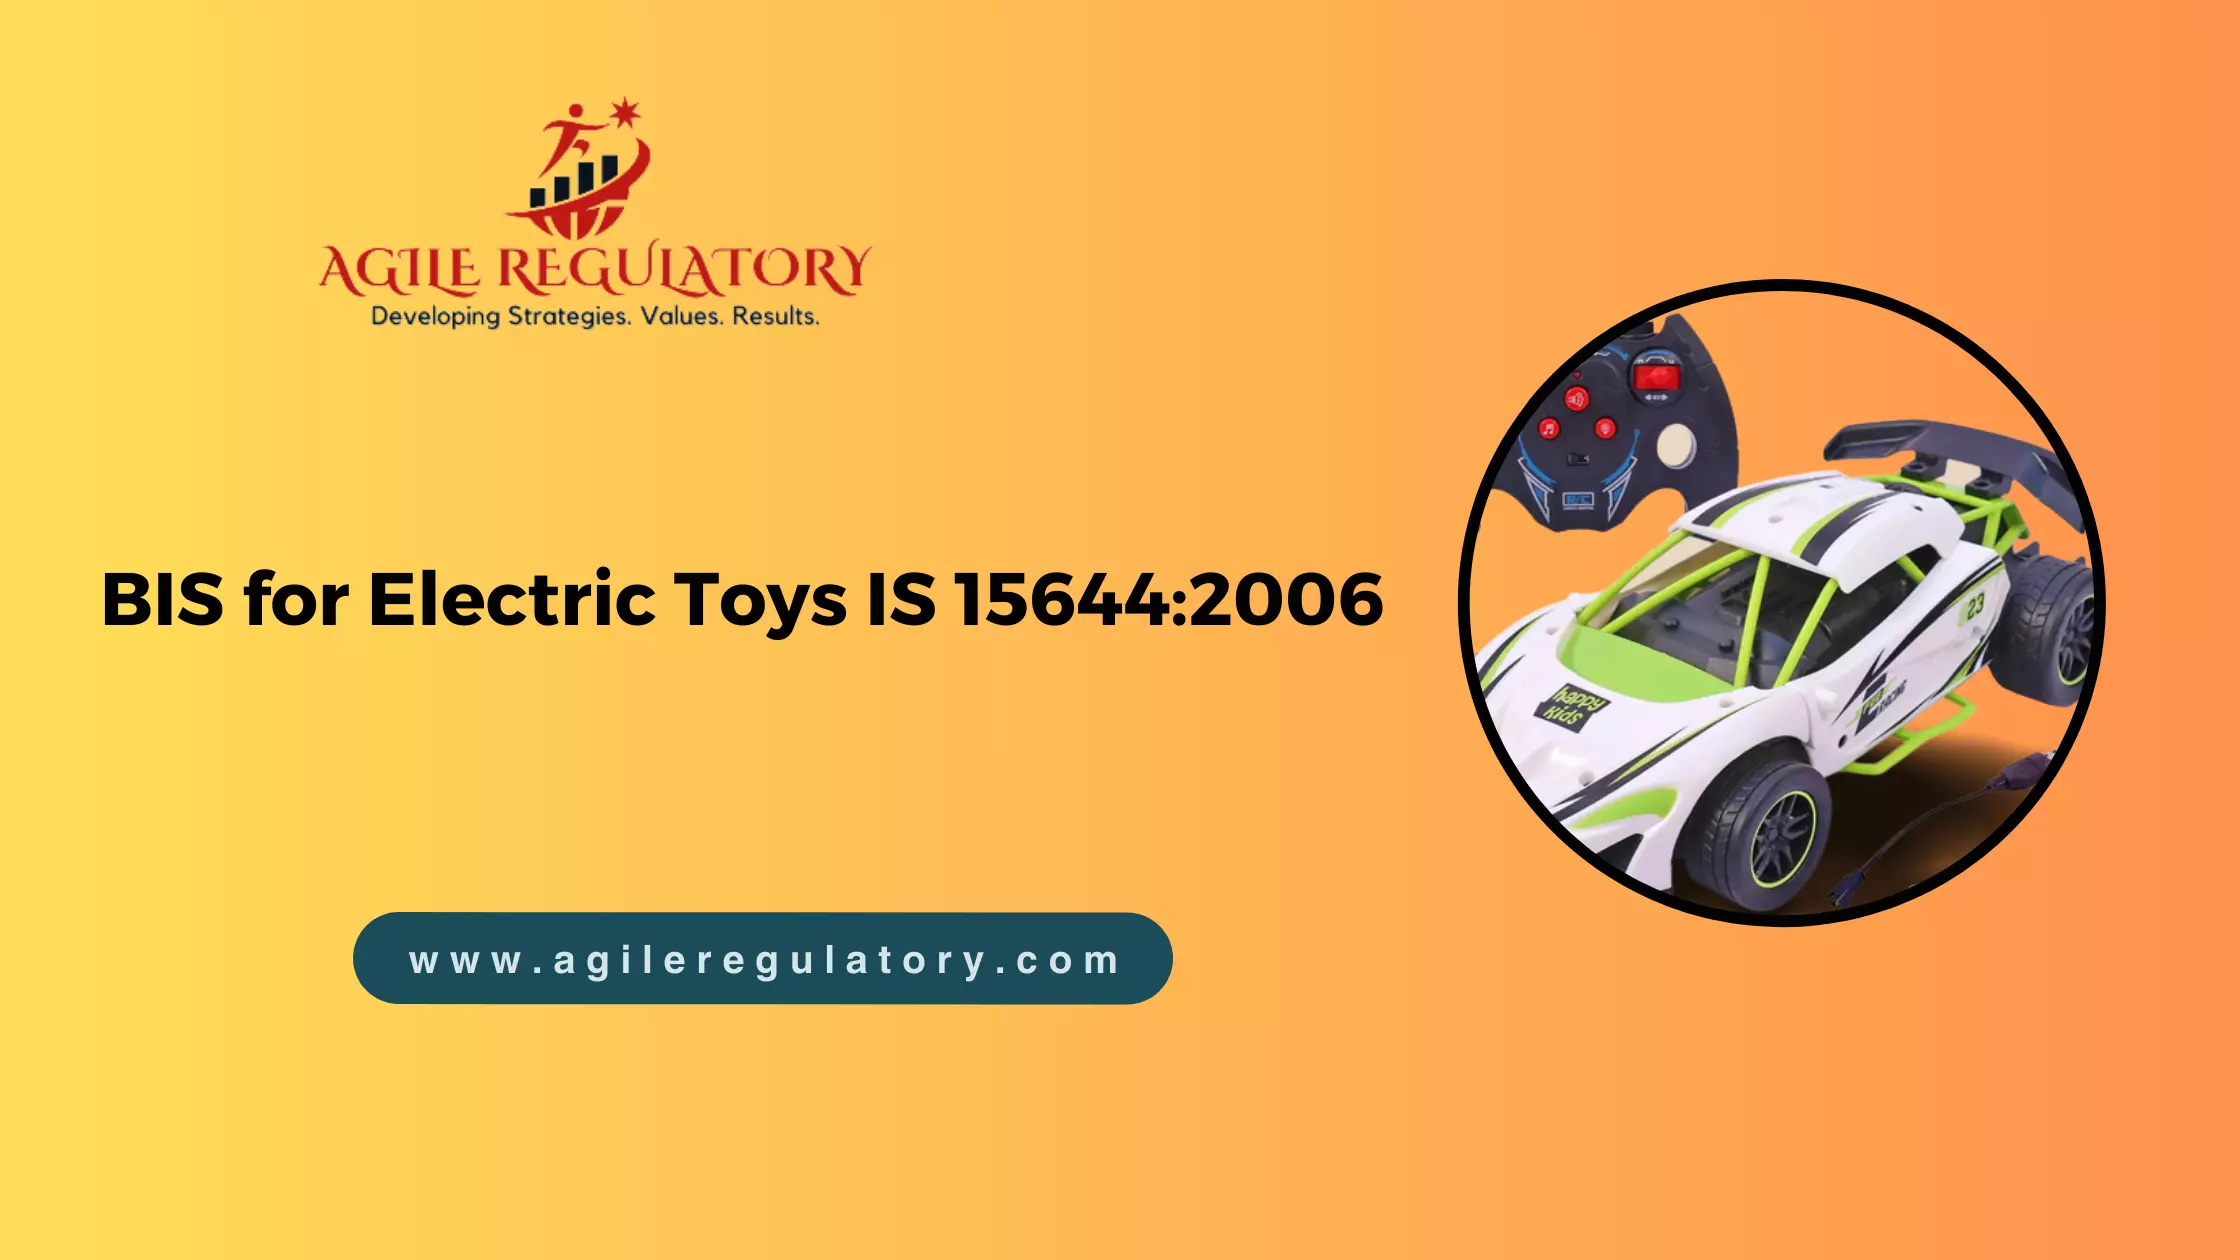 BIS for Electric Toys IS 15644:2006